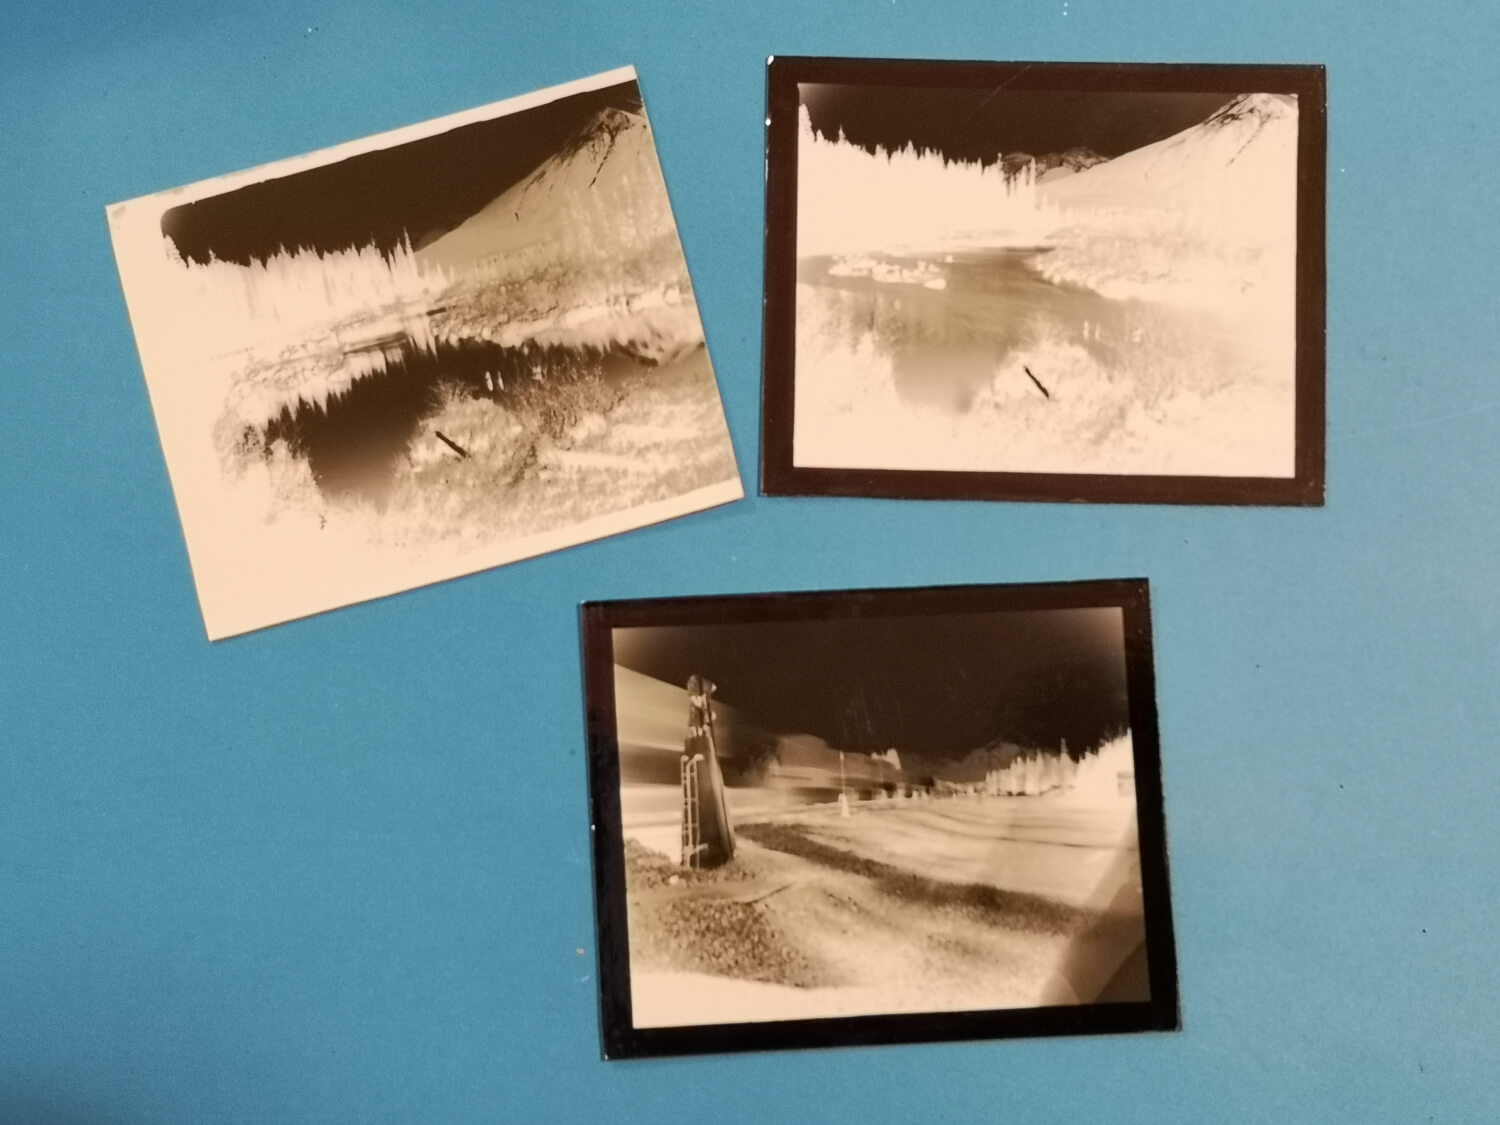 My first field revealed paper negatives!